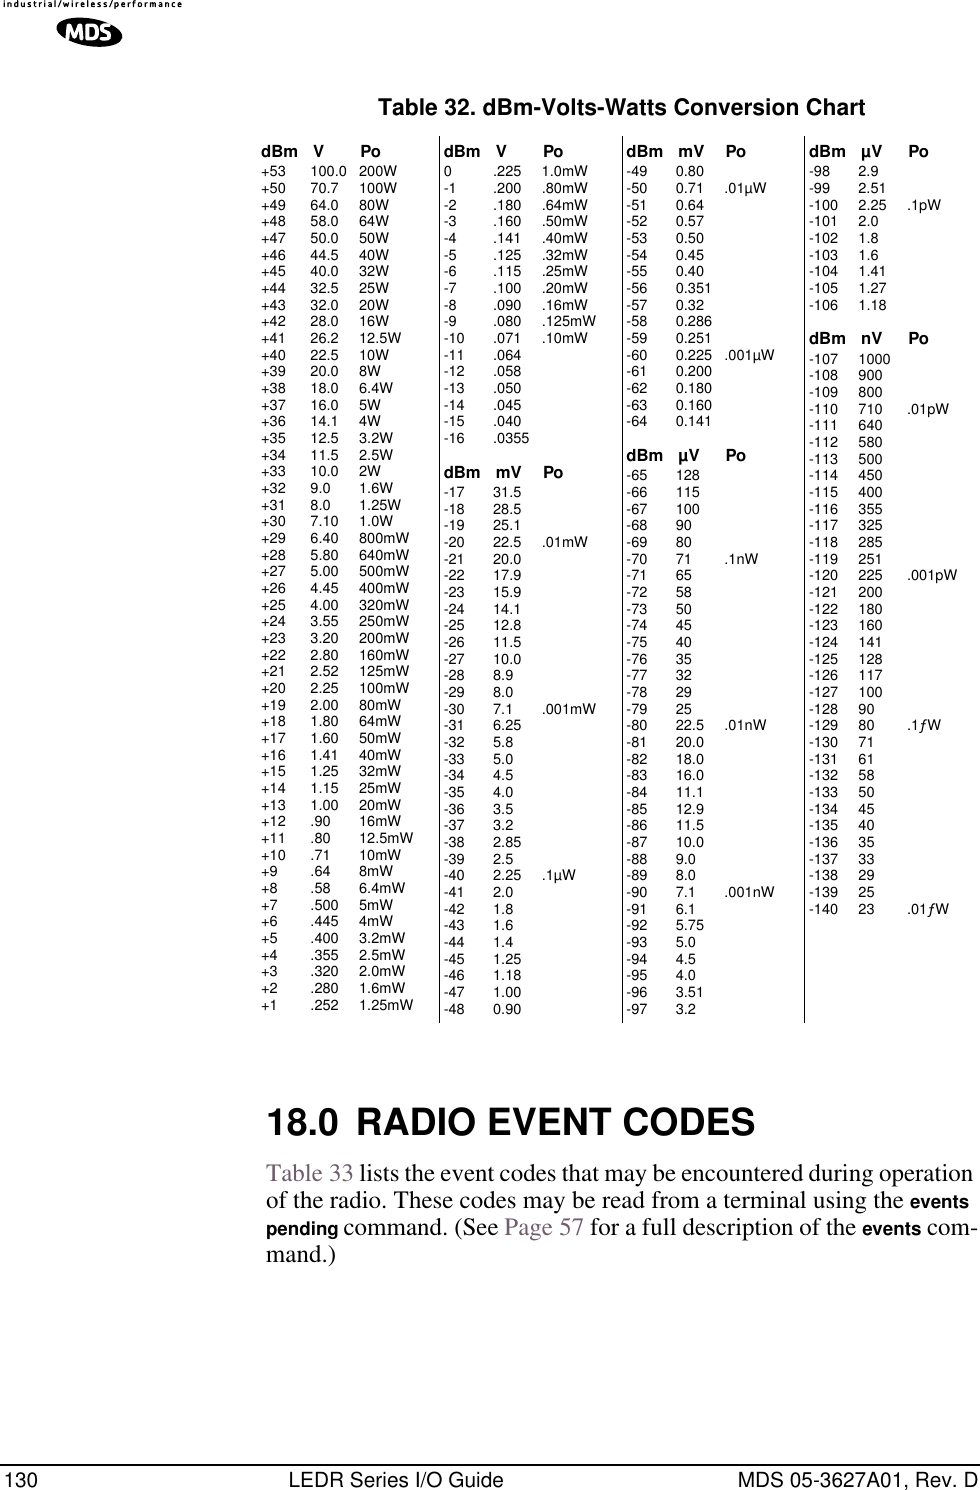 130 LEDR Series I/O Guide MDS 05-3627A01, Rev. DInvisible place holder18.0 RADIO EVENT CODESTable 33 lists the event codes that may be encountered during operation of the radio. These codes may be read from a terminal using the events pending command. (See Page 57 for a full description of the events com-mand.)Table 32. dBm-Volts-Watts Conversion ChartdBm V Po+53 100.0 200W+50 70.7 100W+49 64.0 80W+48 58.0 64W+47 50.0 50W+46 44.5 40W+45 40.0 32W+44 32.5 25W+43 32.0 20W+42 28.0 16W+41 26.2 12.5W+40 22.5 10W+39 20.0 8W+38 18.0 6.4W+37 16.0 5W+36 14.1 4W+35 12.5 3.2W+34 11.5 2.5W+33 10.0 2W+32 9.0 1.6W+31 8.0 1.25W+30 7.10 1.0W+29 6.40 800mW+28 5.80 640mW+27 5.00 500mW+26 4.45 400mW+25 4.00 320mW+24 3.55 250mW+23 3.20 200mW+22 2.80 160mW+21 2.52 125mW+20 2.25 100mW+19 2.00 80mW+18 1.80 64mW+17 1.60 50mW+16 1.41 40mW+15 1.25 32mW+14 1.15 25mW+13 1.00 20mW+12 .90 16mW+11 .80 12.5mW+10 .71 10mW+9 .64 8mW+8 .58 6.4mW+7 .500 5mW+6 .445 4mW+5 .400 3.2mW+4 .355 2.5mW+3 .320 2.0mW+2 .280 1.6mW+1 .252 1.25mWdBm V Po0 .225 1.0mW-1 .200 .80mW-2 .180 .64mW-3 .160 .50mW-4 .141 .40mW-5 .125 .32mW-6 .115 .25mW-7 .100 .20mW-8 .090 .16mW-9 .080 .125mW-10 .071 .10mW-11 .064-12 .058-13 .050-14 .045-15 .040-16 .0355dBm mV Po-17 31.5-18 28.5-19 25.1-20 22.5 .01mW-21 20.0-22 17.9-23 15.9-24 14.1-25 12.8-26 11.5-27 10.0-28 8.9-29 8.0-30 7.1 .001mW-31 6.25-32 5.8-33 5.0-34 4.5-35 4.0-36 3.5-37 3.2-38 2.85-39 2.5-40 2.25 .1µW-41 2.0-42 1.8-43 1.6-44 1.4-45 1.25-46 1.18-47 1.00-48 0.90dBm mV Po-49 0.80-50 0.71 .01µW-51 0.64-52 0.57-53 0.50-54 0.45-55 0.40-56 0.351-57 0.32-58 0.286-59 0.251-60 0.225 .001µW-61 0.200-62 0.180-63 0.160-64 0.141dBm µV Po-65 128-66 115-67 100-68 90-69 80-70 71 .1nW-71 65-72 58-73 50-74 45-75 40-76 35-77 32-78 29-79 25-80 22.5 .01nW-81 20.0-82 18.0-83 16.0-84 11.1-85 12.9-86 11.5-87 10.0-88 9.0-89 8.0-90 7.1 .001nW-91 6.1-92 5.75-93 5.0-94 4.5-95 4.0-96 3.51-97 3.2dBm µV Po-98 2.9-99 2.51-100 2.25 .1pW-101 2.0-102 1.8-103 1.6-104 1.41-105 1.27-106 1.18dBm nV Po-107 1000-108 900-109 800-110 710 .01pW-111 640-112 580-113 500-114 450-115 400-116 355-117 325-118 285-119 251-120 225 .001pW-121 200-122 180-123 160-124 141-125 128-126 117-127 100-128 90-129 80 .1ƒW-130 71-131 61-132 58-133 50-134 45-135 40-136 35-137 33-138 29-139 25-140 23 .01ƒW